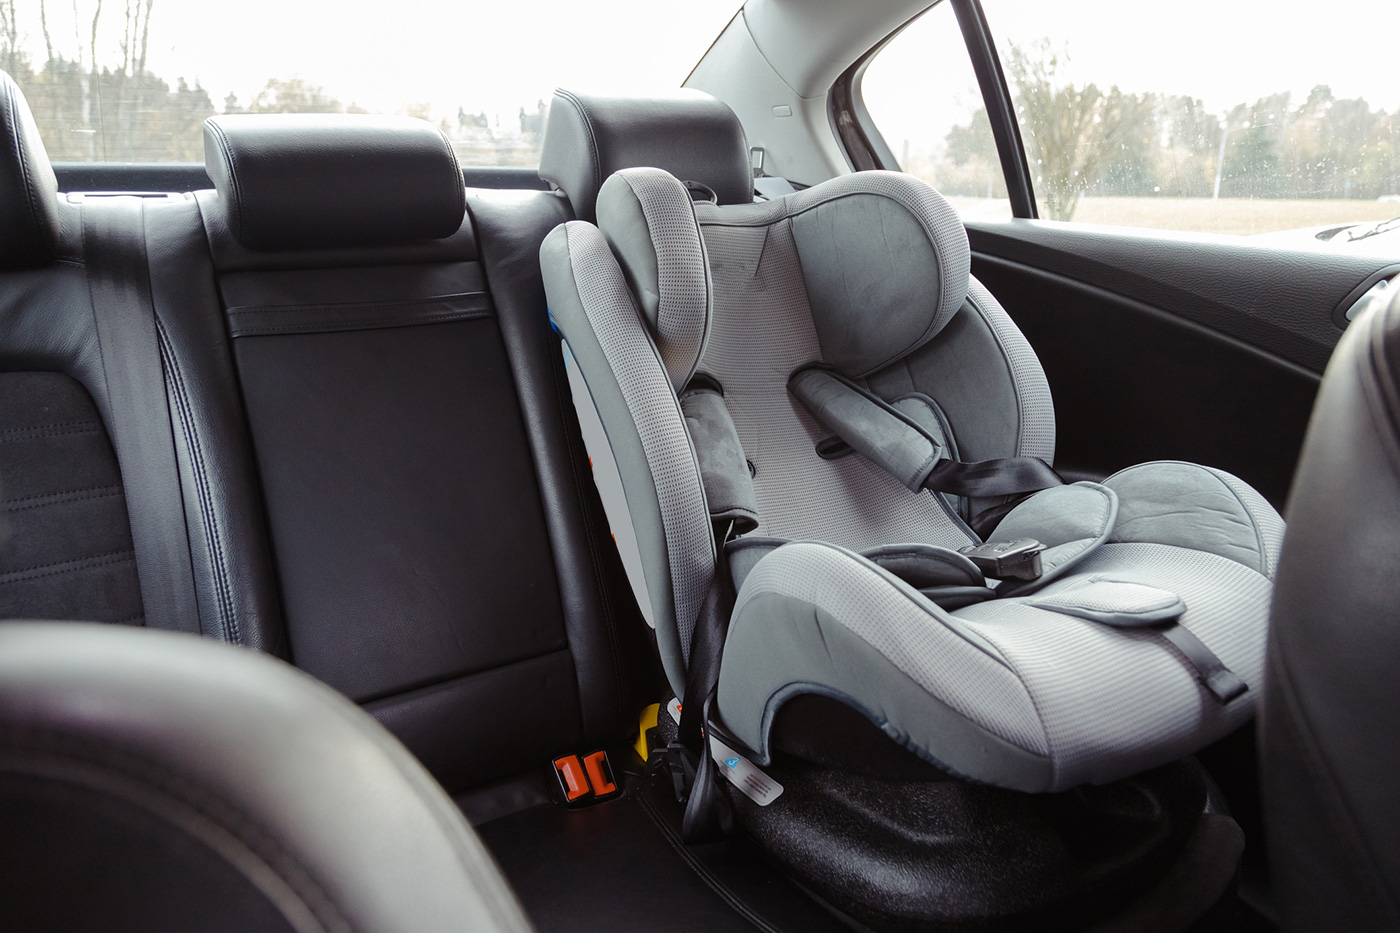 Woman Faces Manslaughter Charges After Failing to Restrain Child in Car Seat